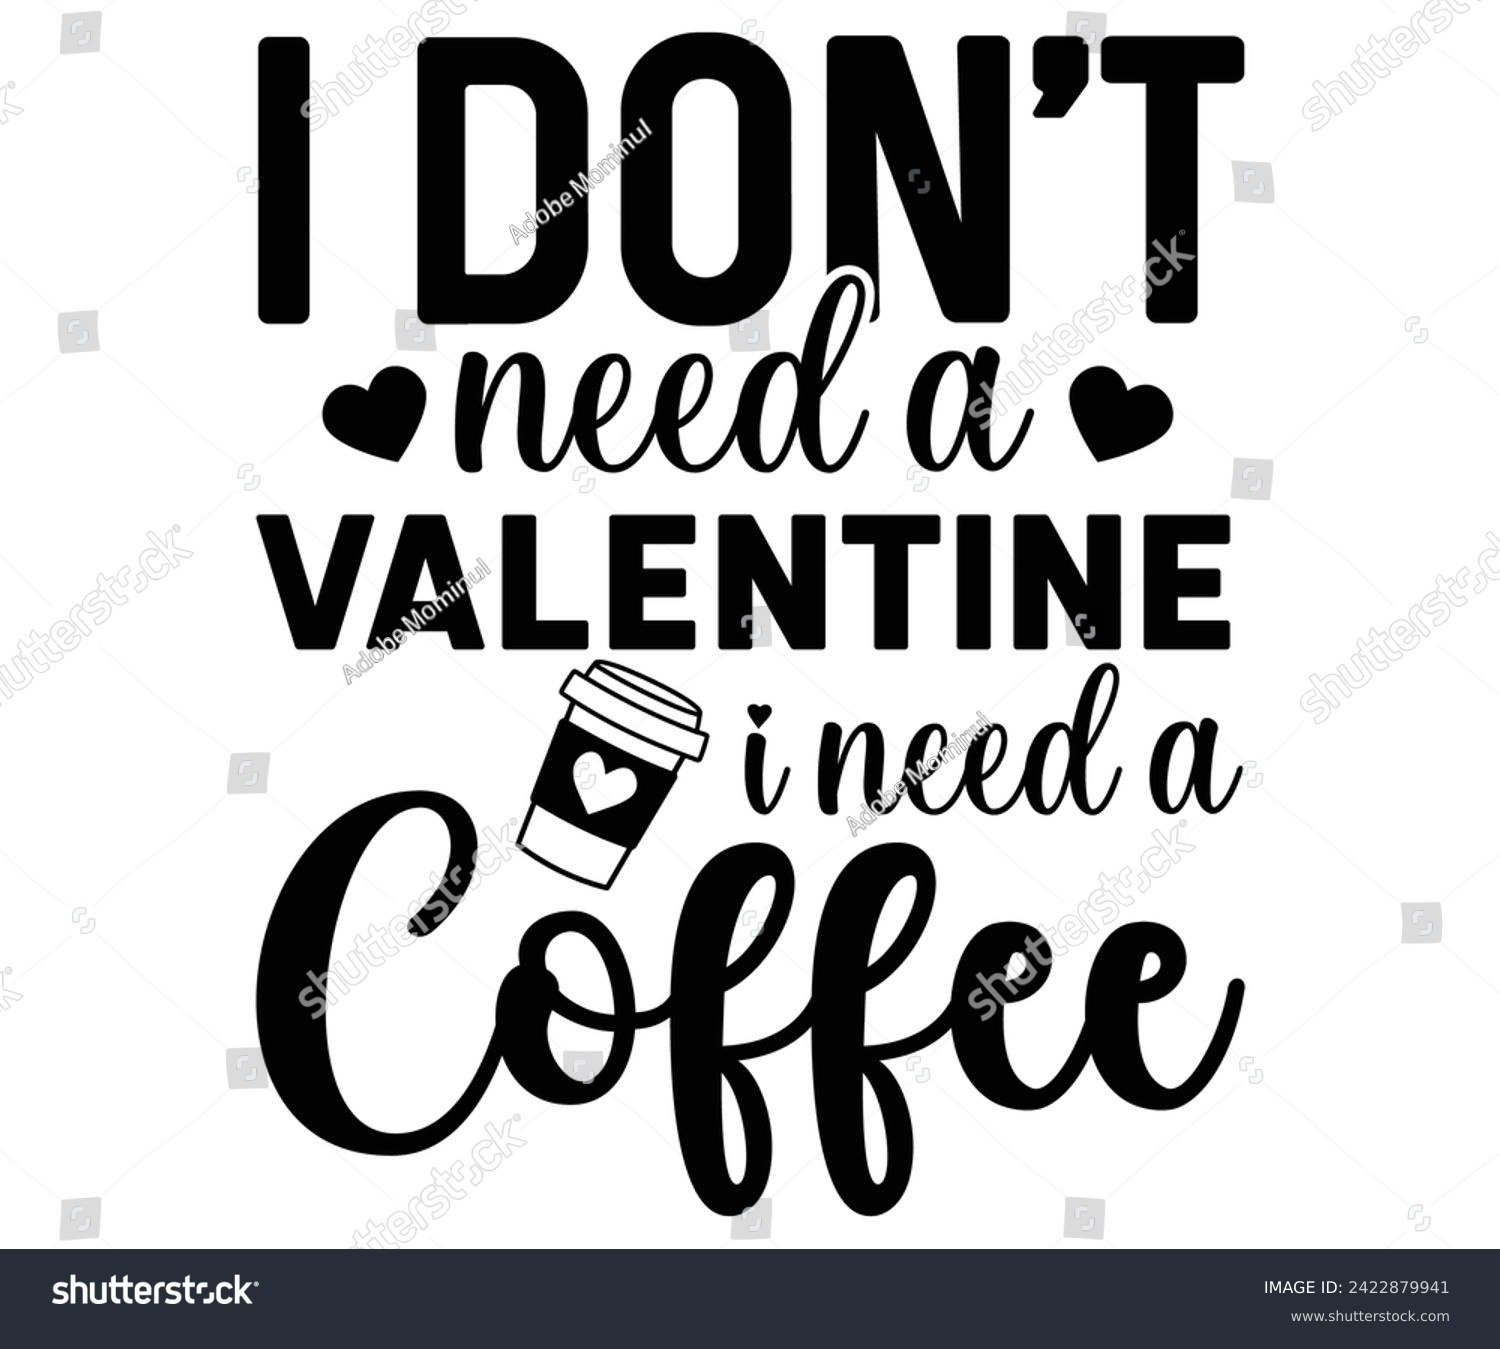 SVG of I Don't Need A Valentine I Need a Coffee Svg,Coffee Svg,Coffee Retro,Funny Coffee Sayings,Coffee Mug Svg,Coffee Cup Svg,Gift For Coffee,Coffee Lover,Caffeine Svg,Svg Cut File,Coffee Quotes, svg